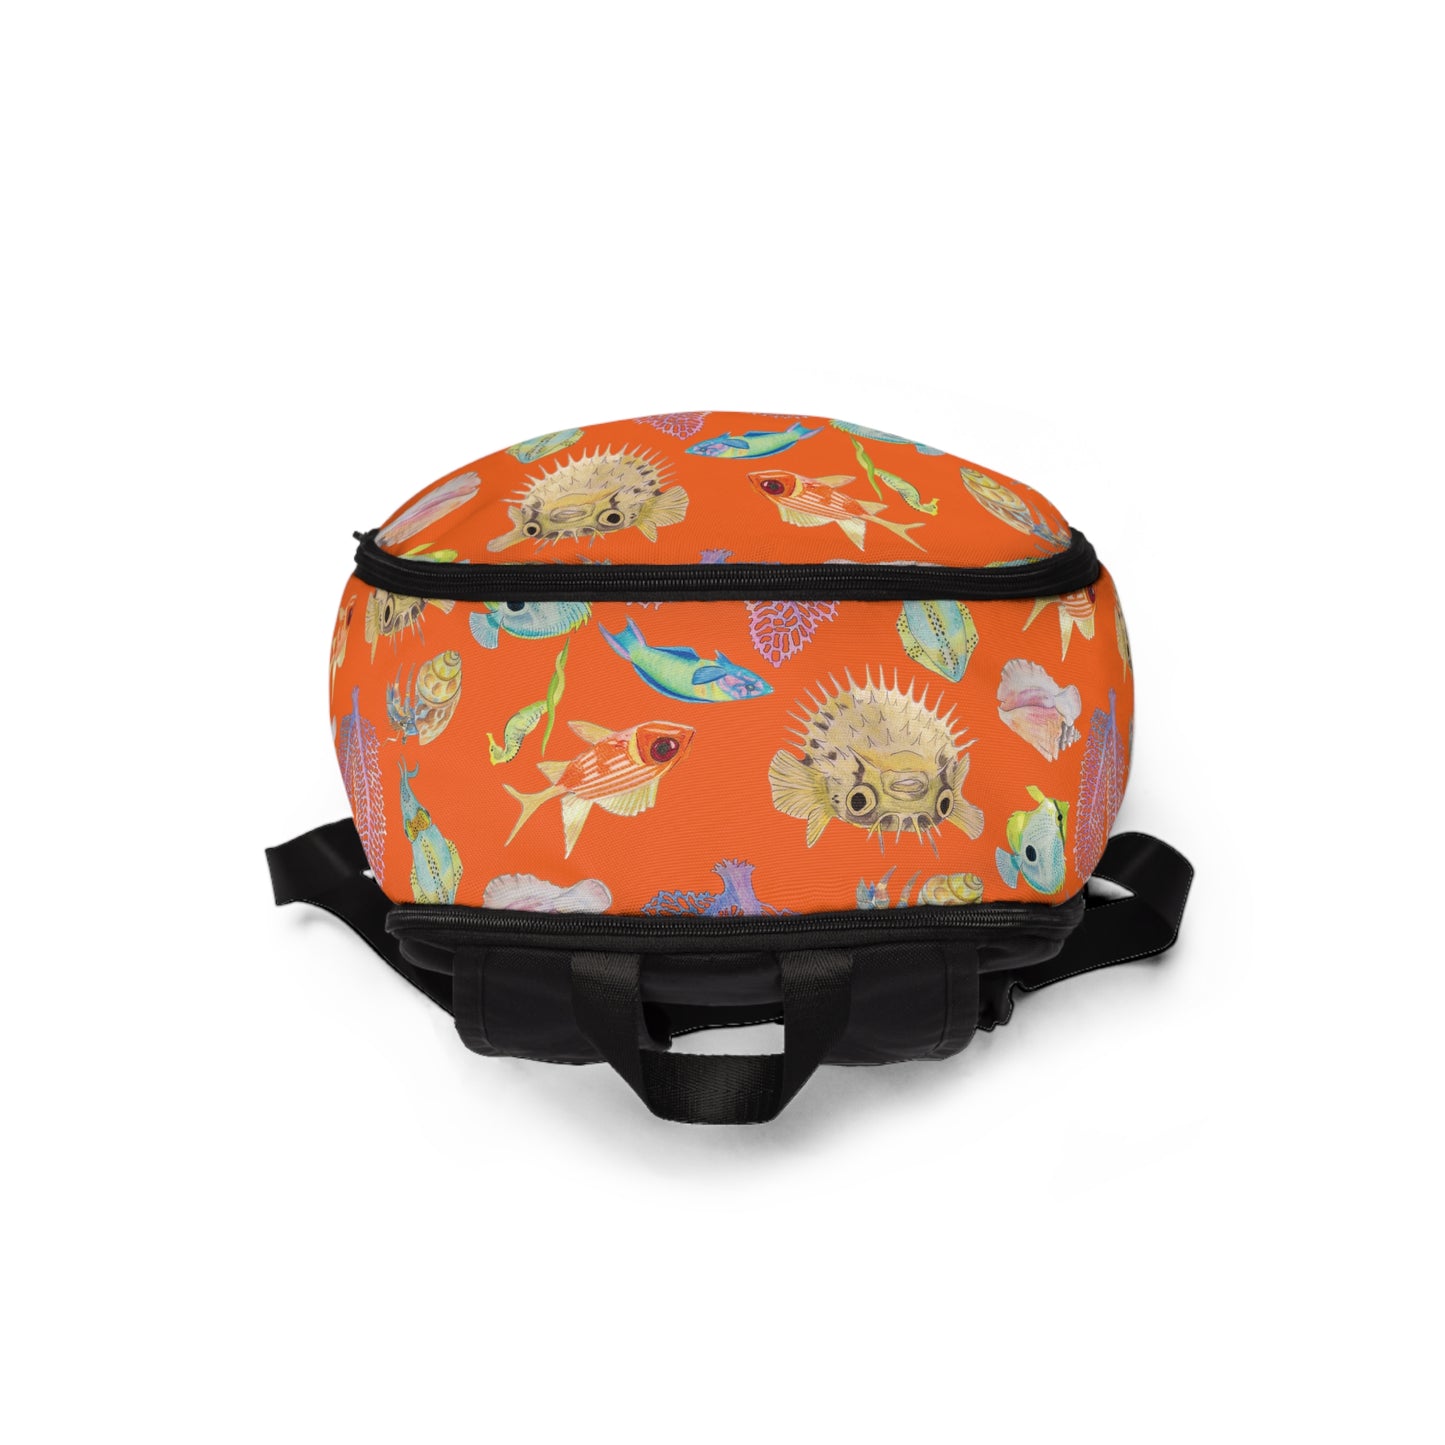 Sargasso Sunrise - Fabric Backpack - Fire